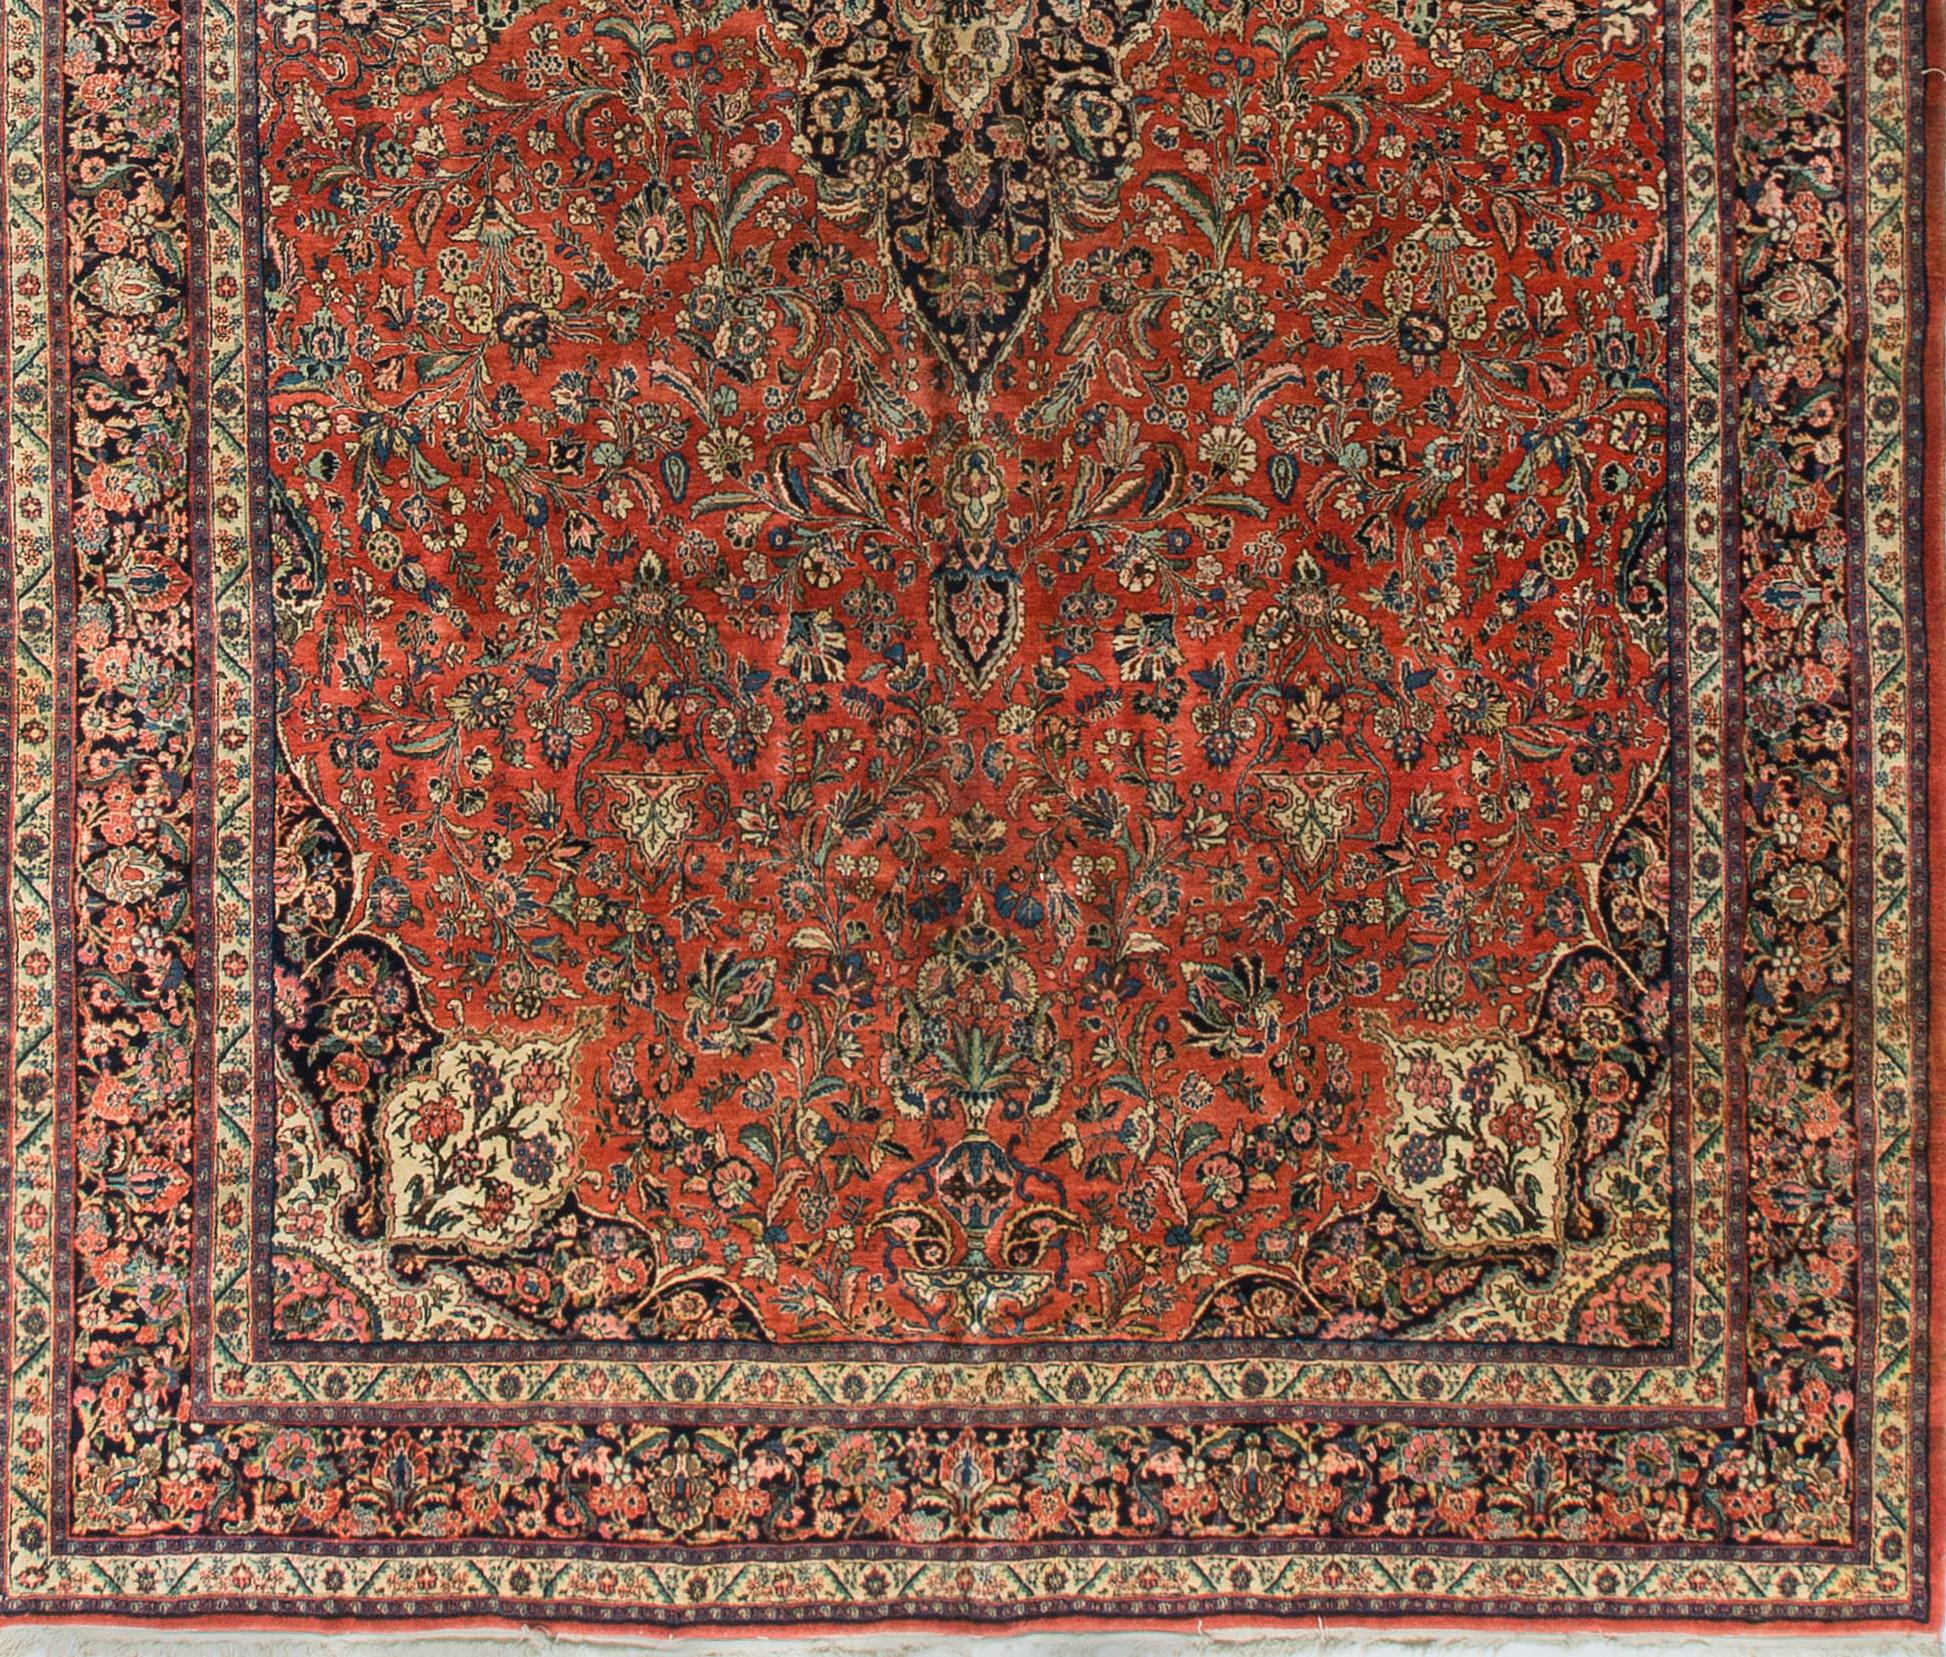 Hand-Woven Antique Persian Kazvin Red / Navy Rug, circa 1930, Size 10'9 x 15'8 For Sale